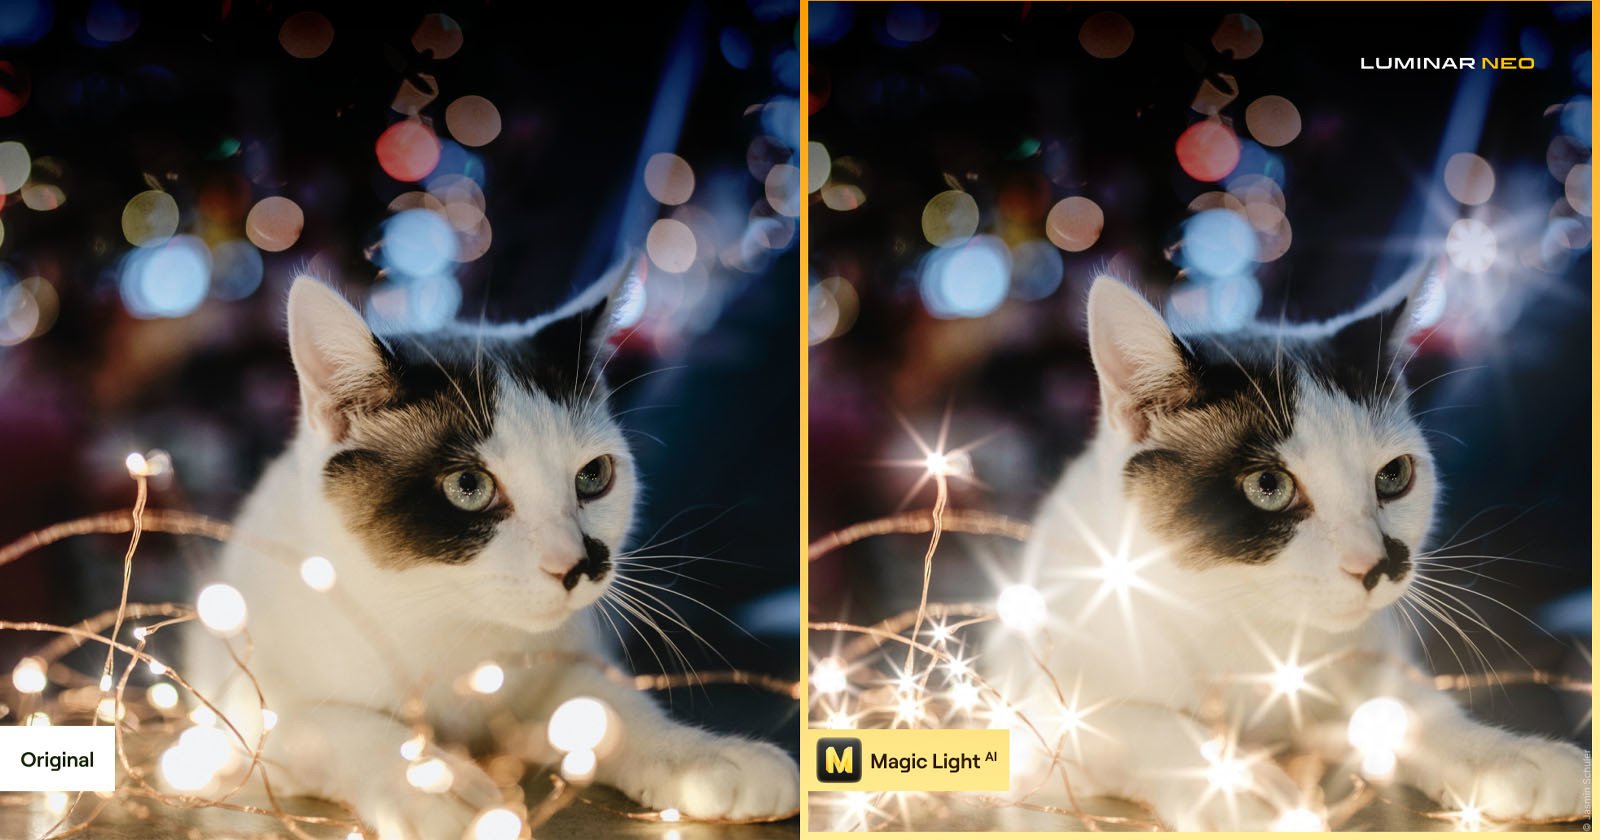 Skylums 7th Luminar Neo Extension Makes Lights in Photos Shiny